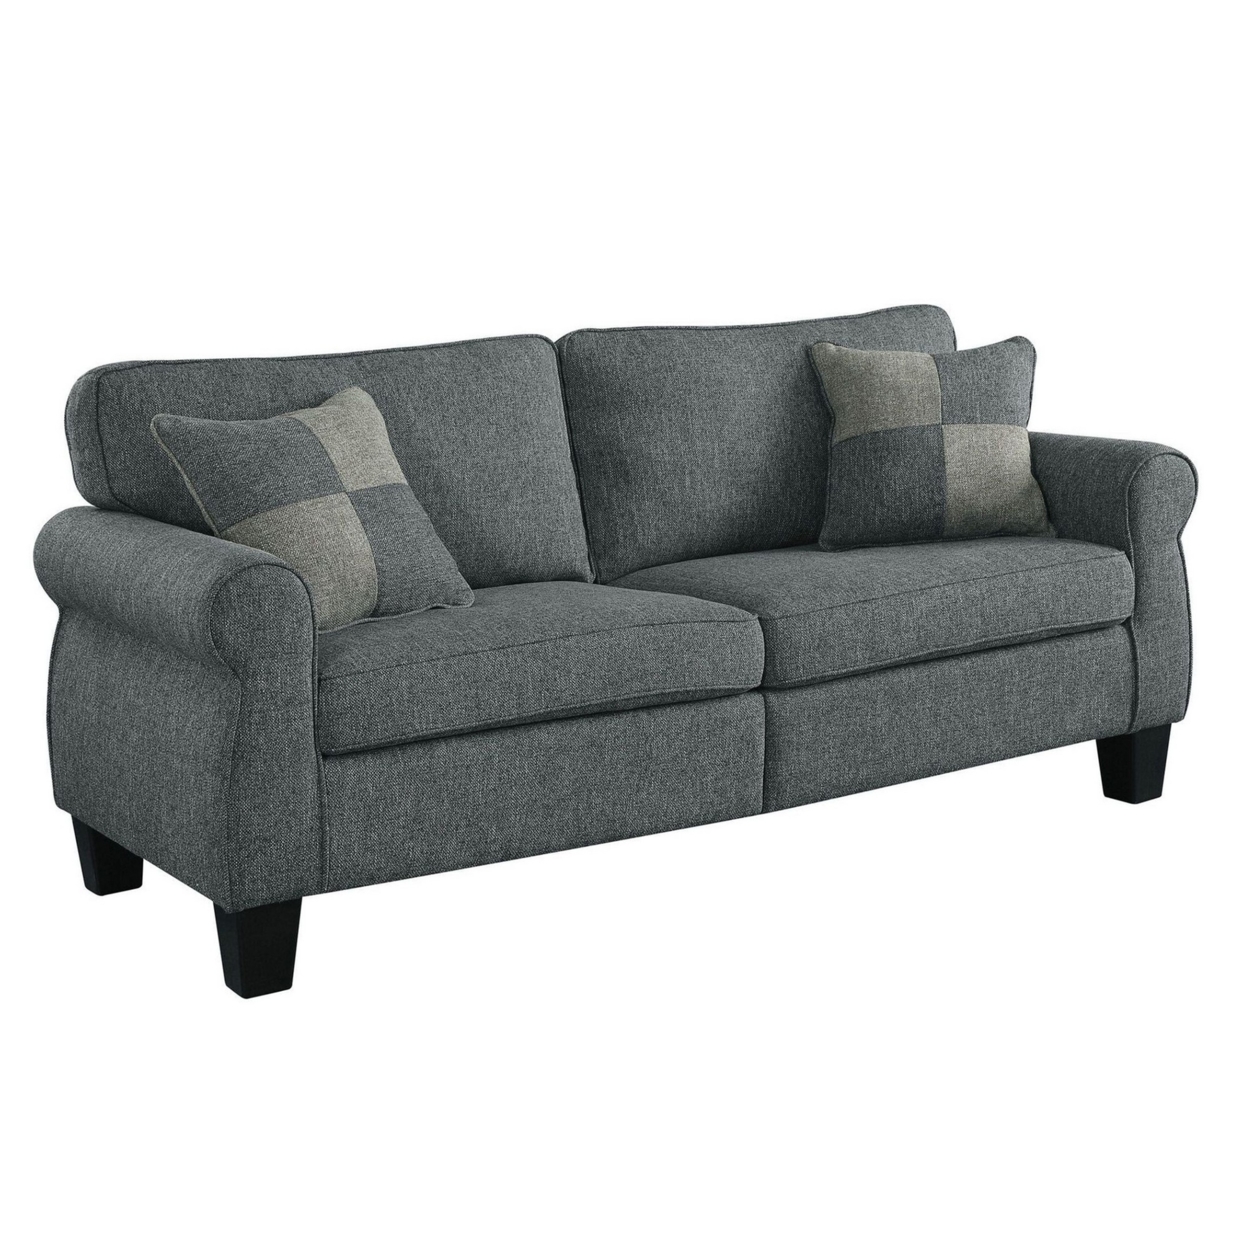 Sofa With Fabric Upholstery And Rolled Design Arms, Gray- Saltoro Sherpi